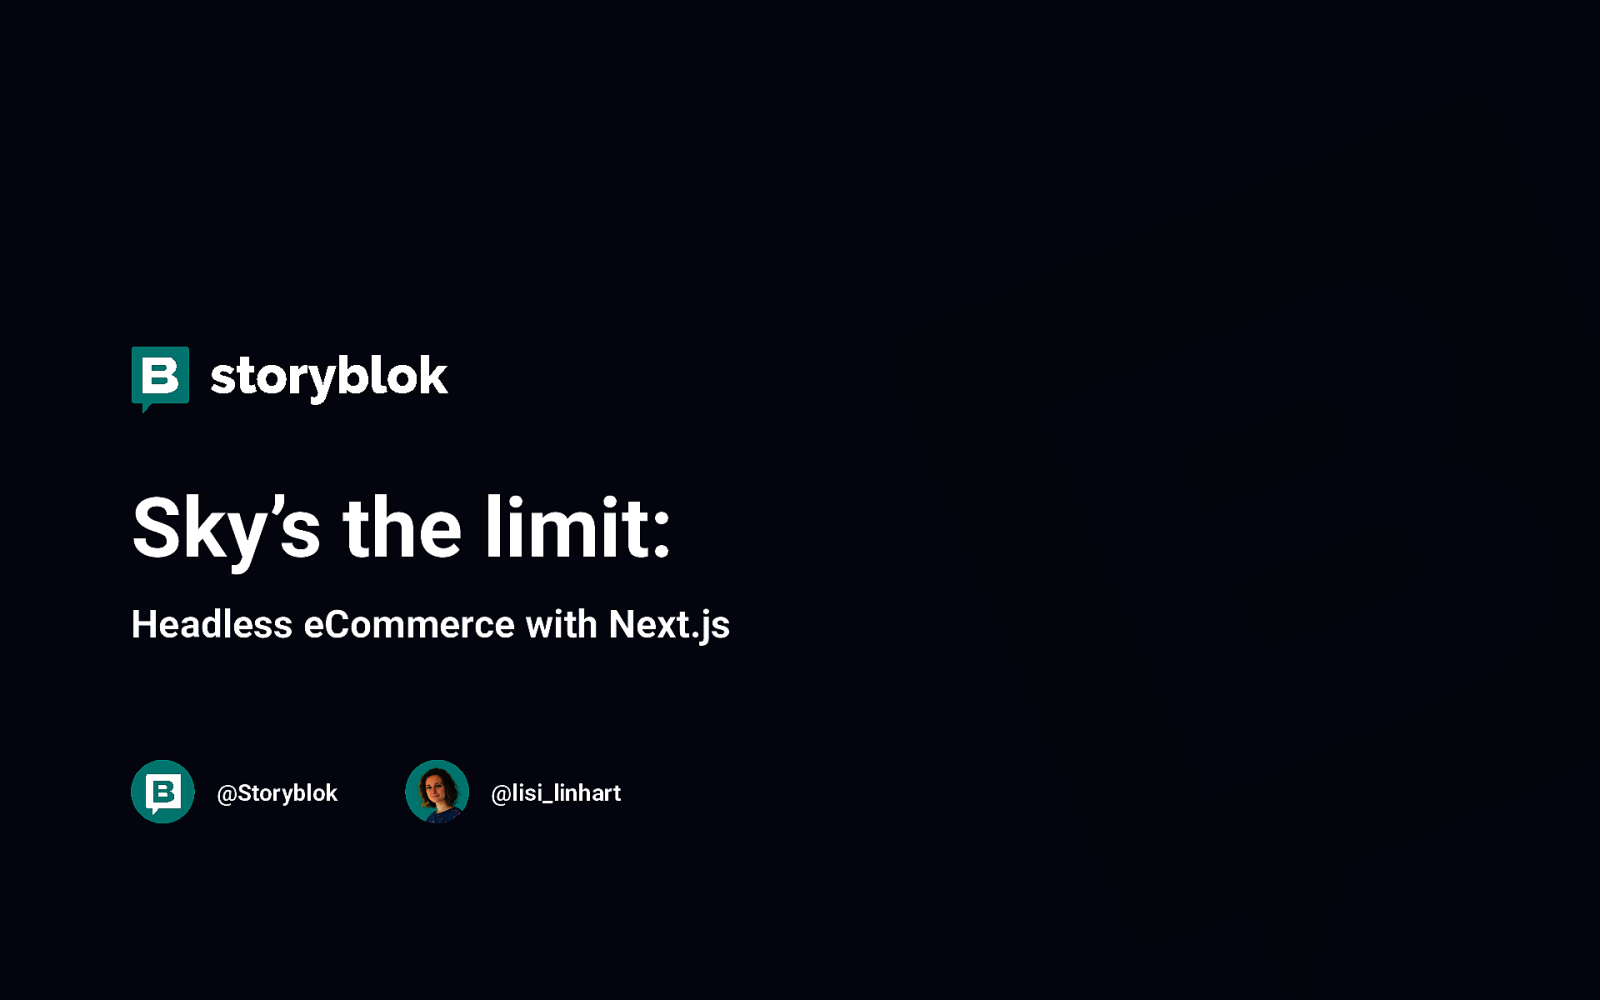  Sky’s the limit: Headless eCommerce with Next.js